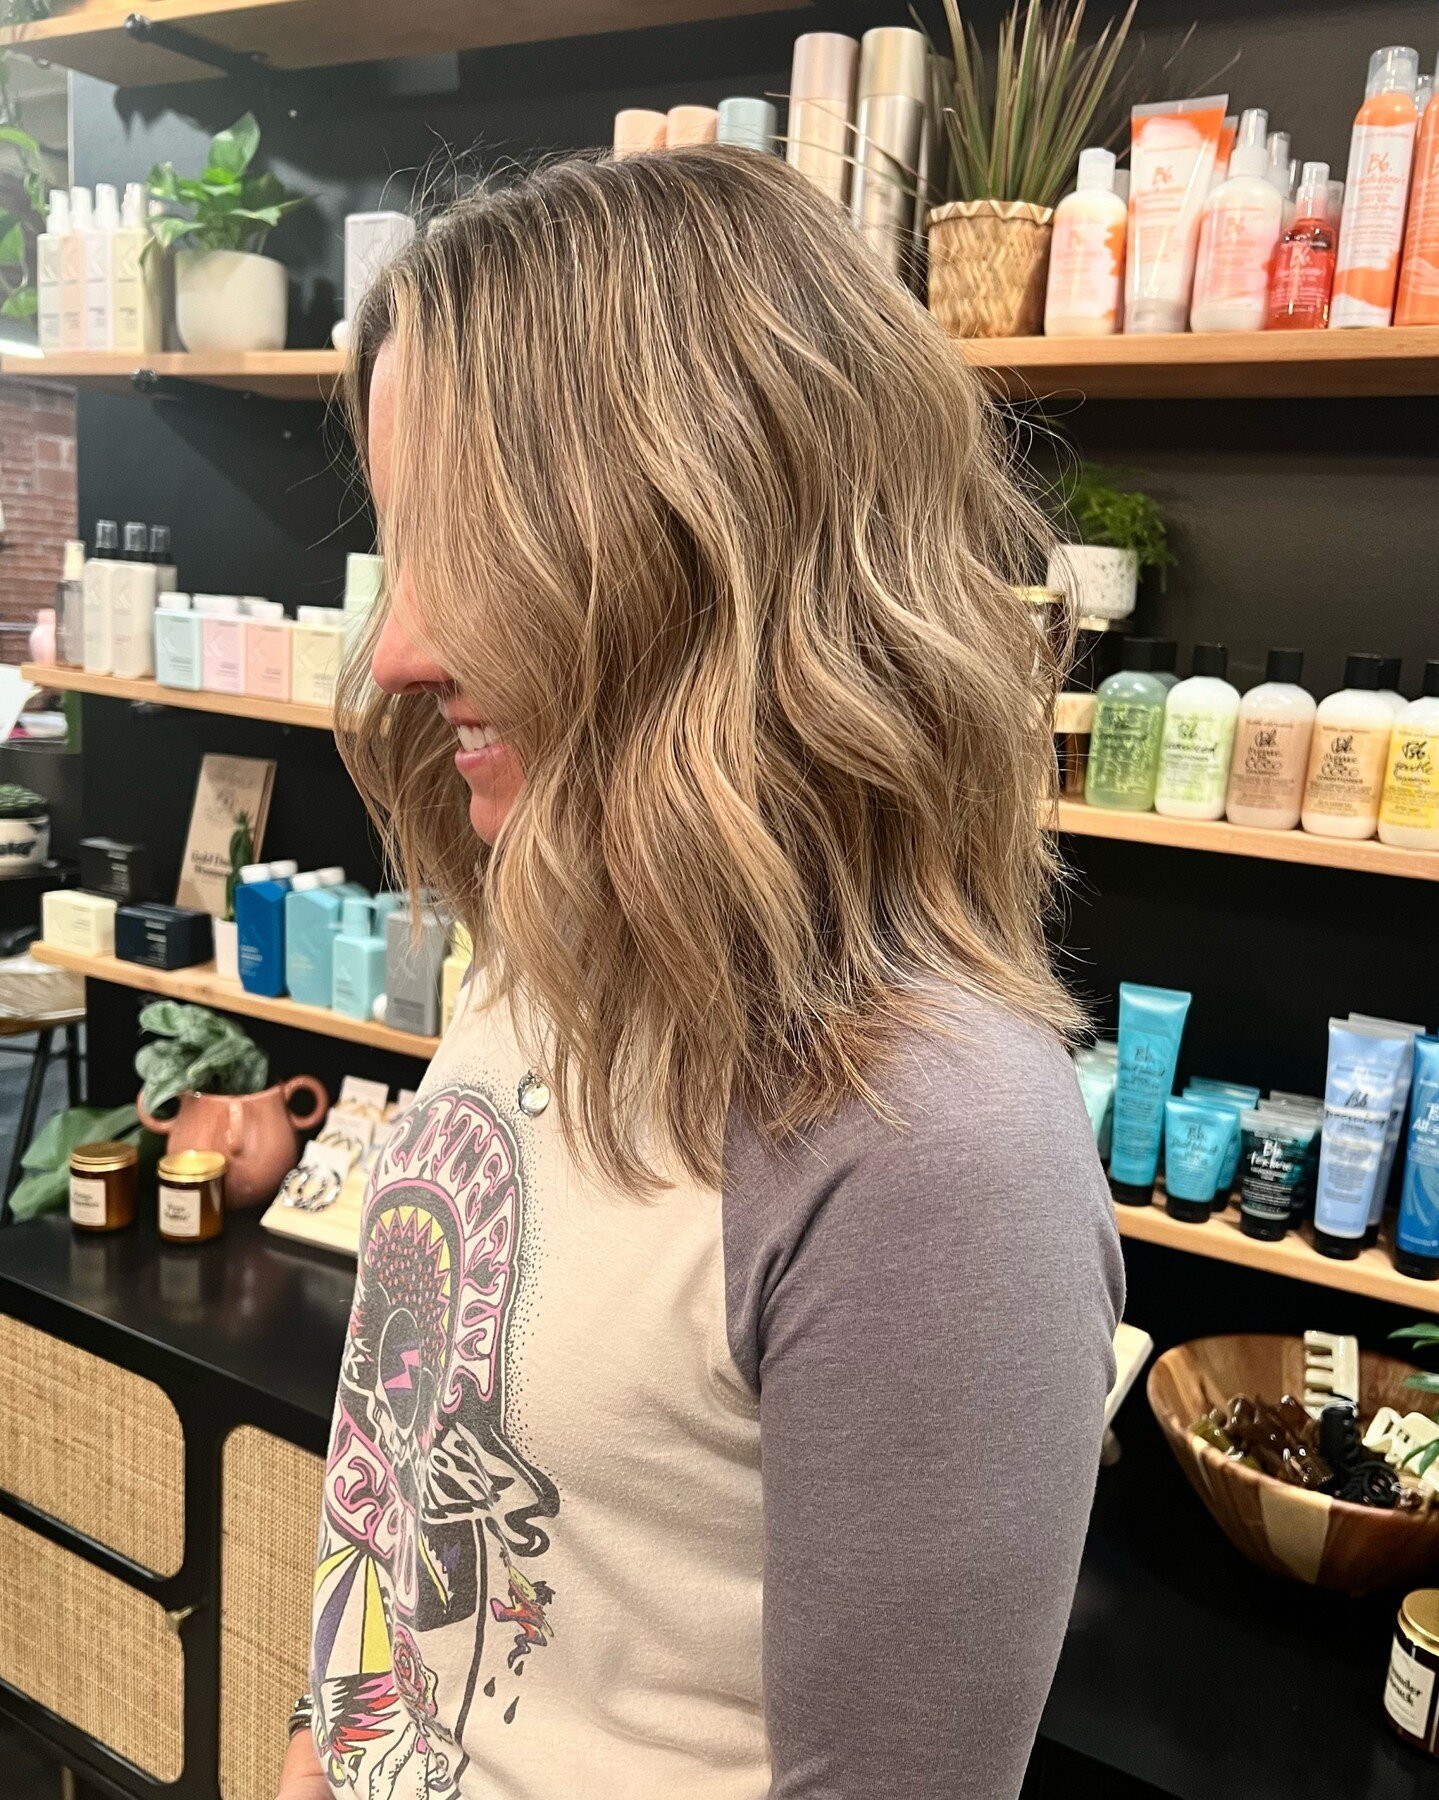 How the heck do I get my beach waves to stay? Let me tell you!

After you're done curling, let the curls cool down completely before running your fingers through + finish with a flexible hair spray

𝔹𝕒𝕕𝕒 𝕓𝕚𝕟𝕘, 𝕓𝕒𝕓𝕒 𝕓𝕠𝕠𝕞! 
Fizz free lo